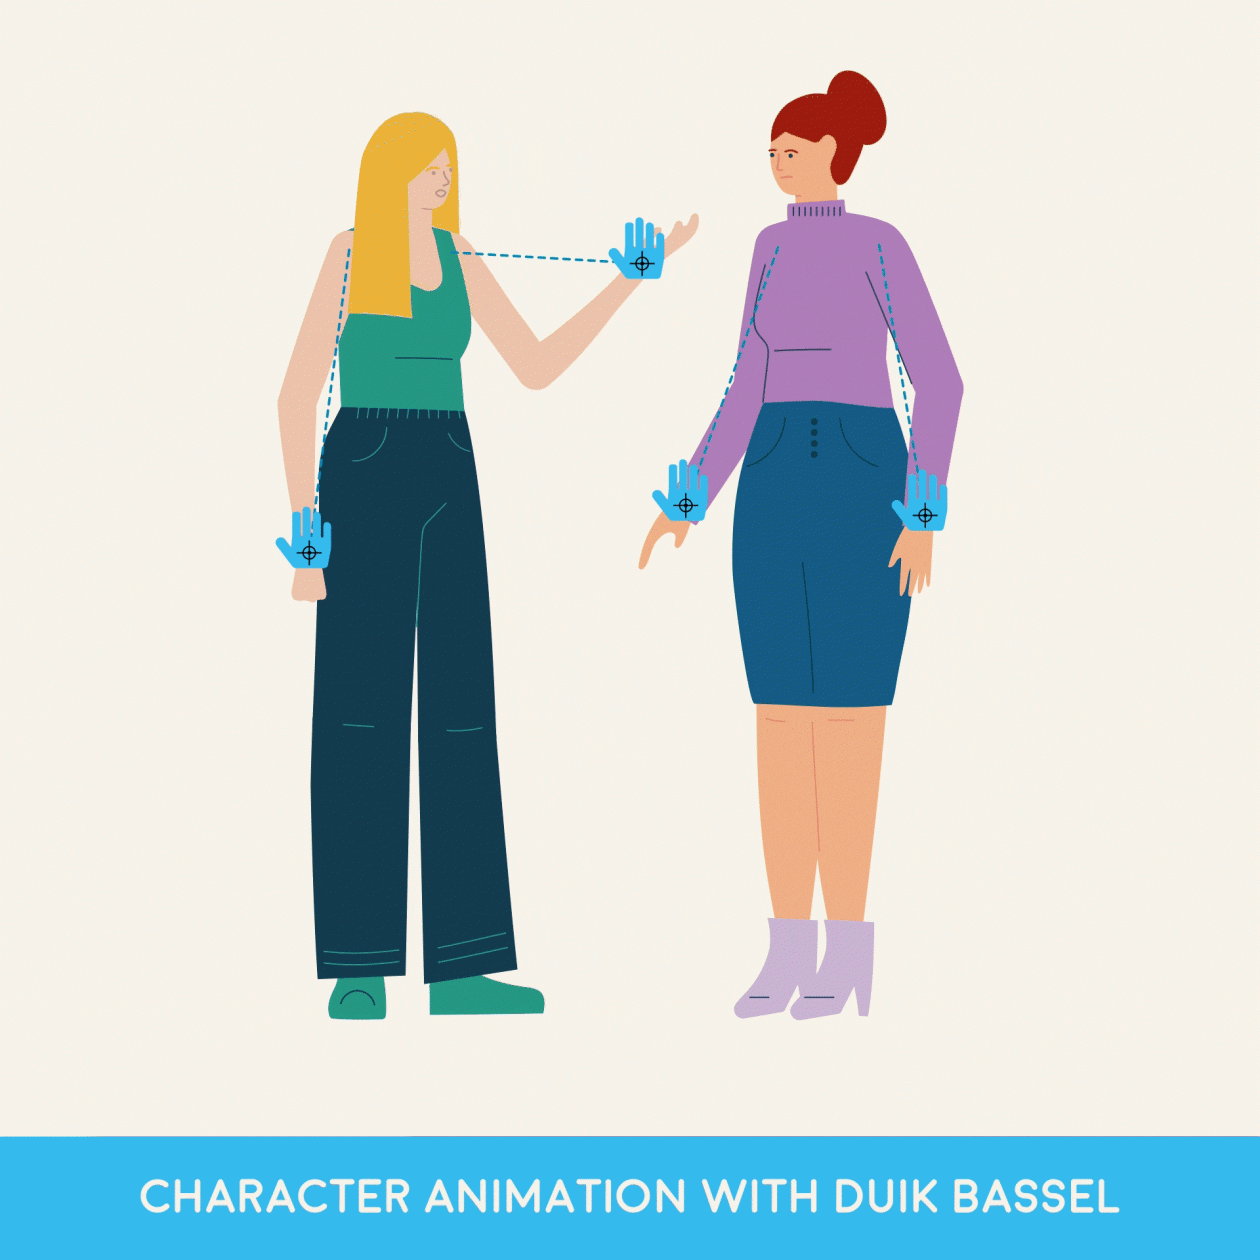 Character animation with Duik Bassel